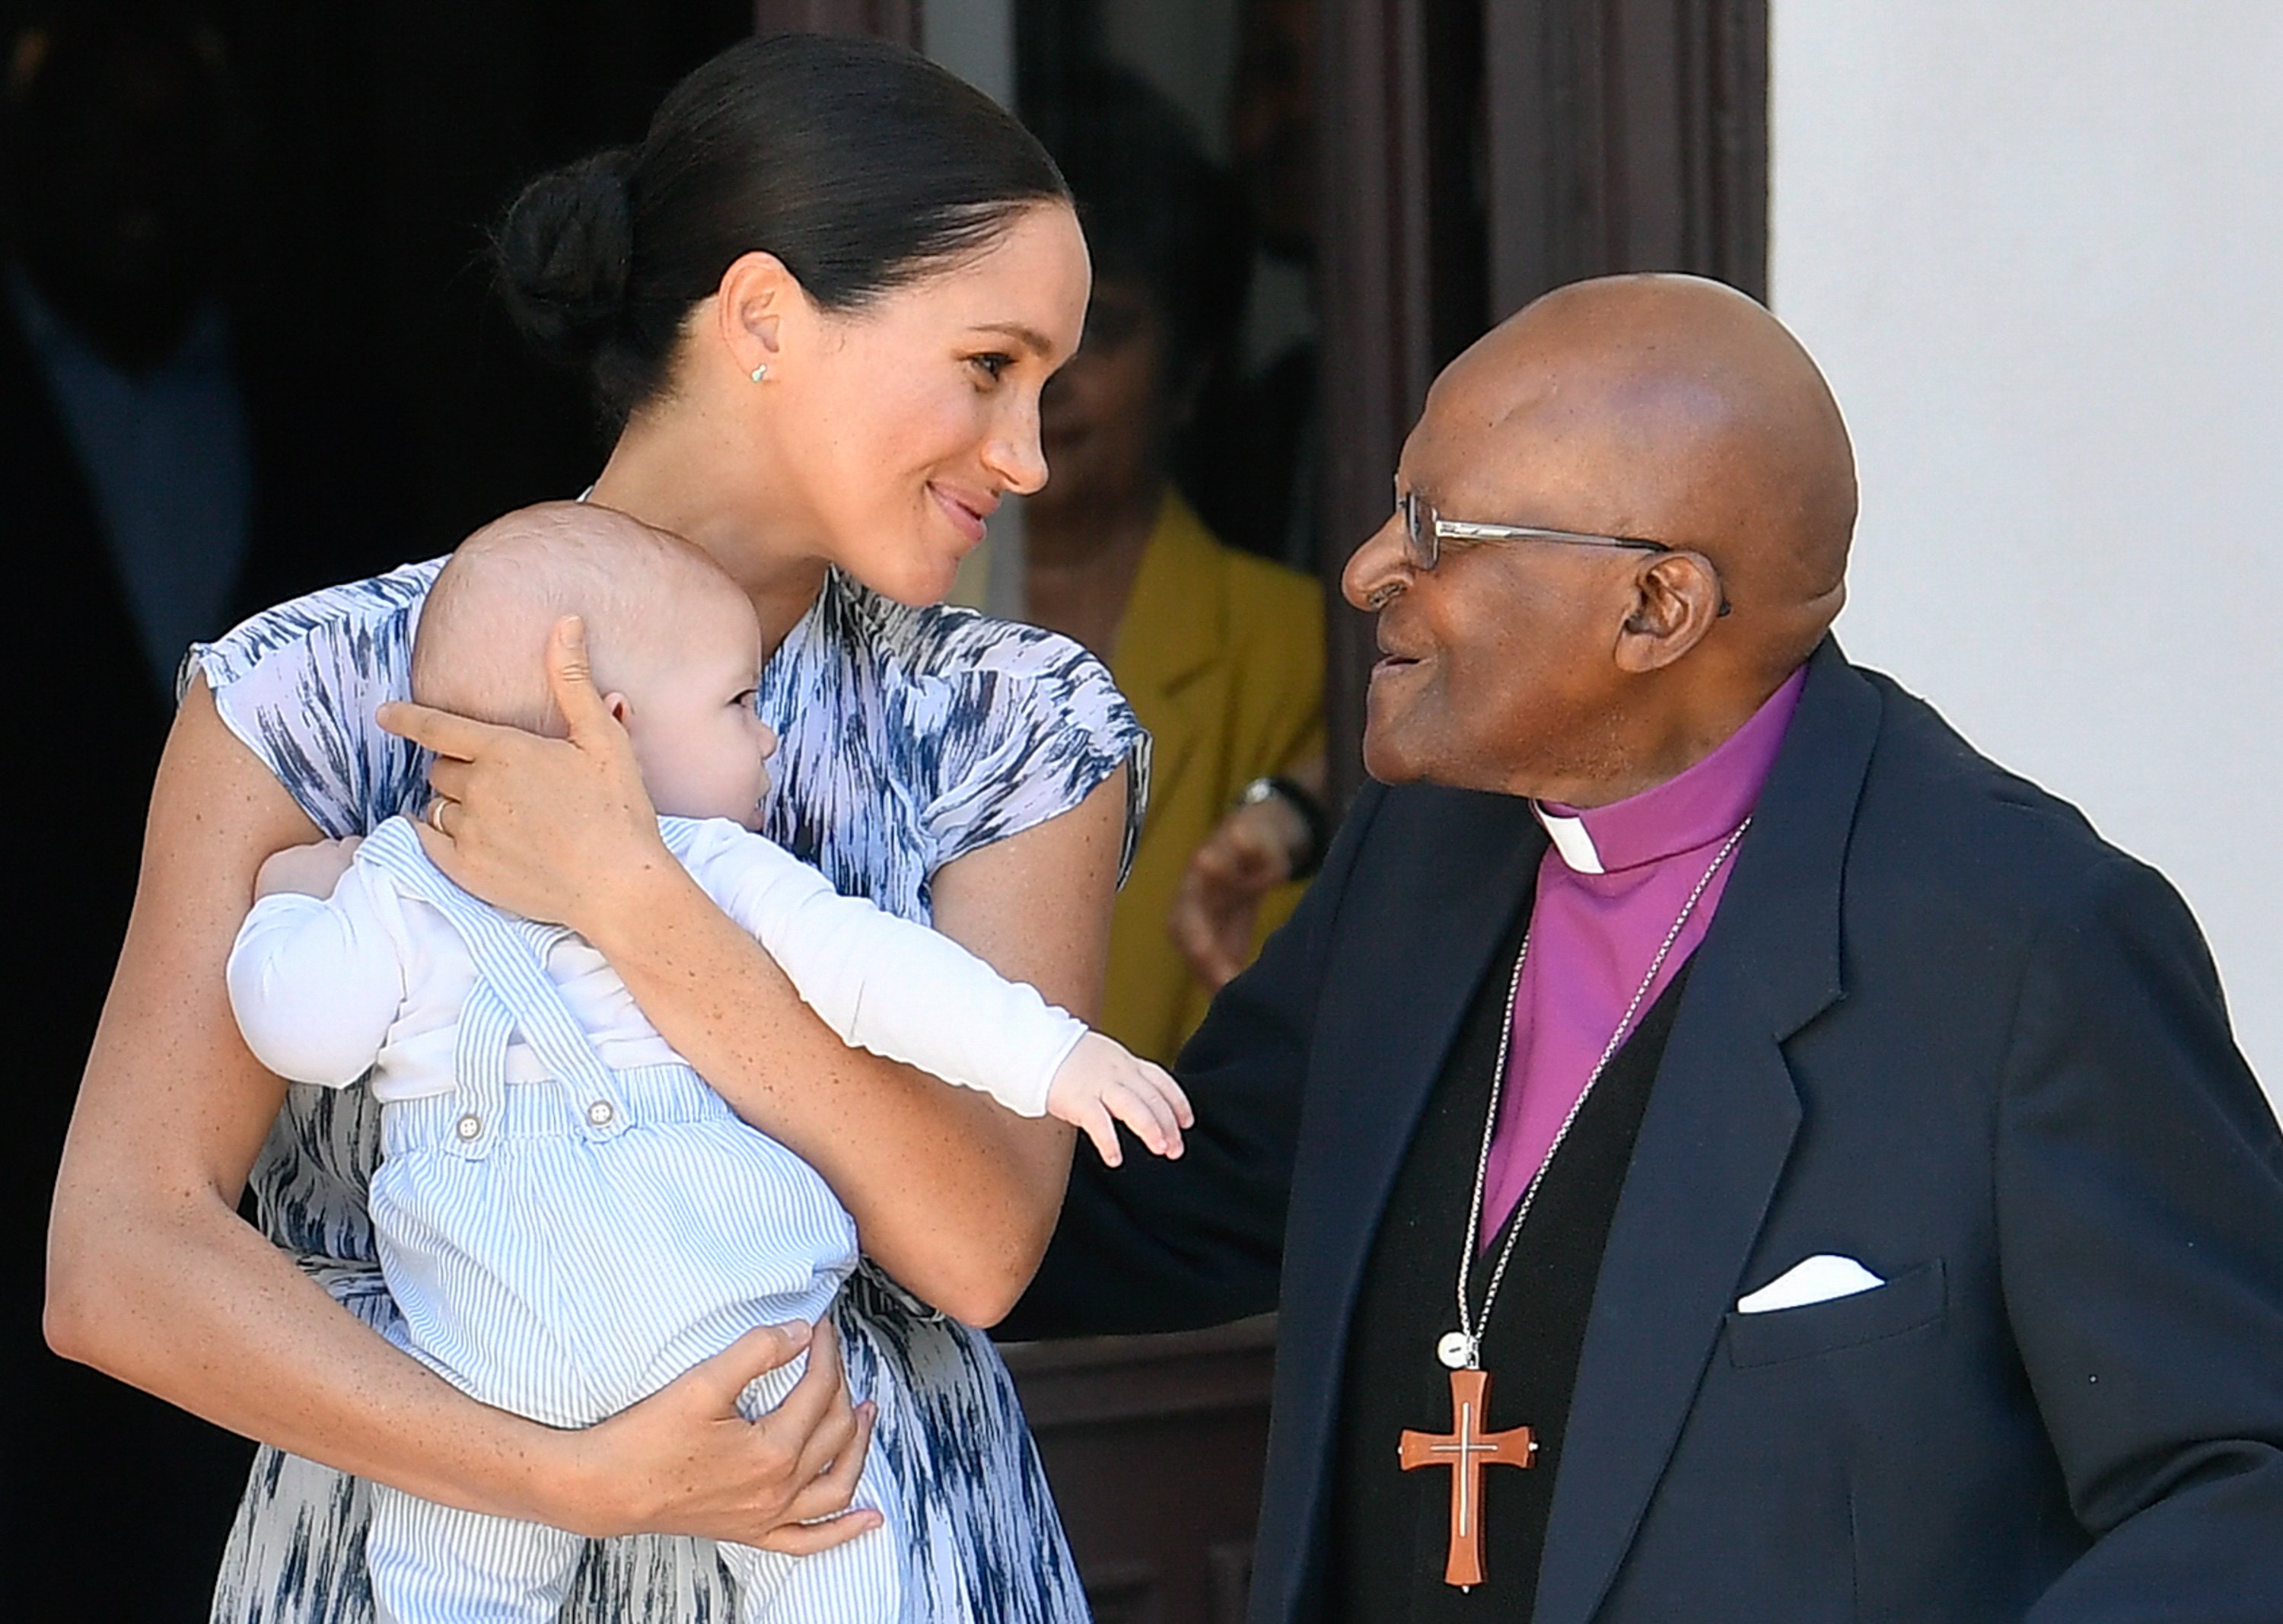 Meghan Markle pictured holding her baby son Archie alongside Archbishop Desmond Tutu at the Desmond & Leah Tutu Legacy Foundation on September 25, 2019 in Cape Town, South Africa. / Source: Getty Images